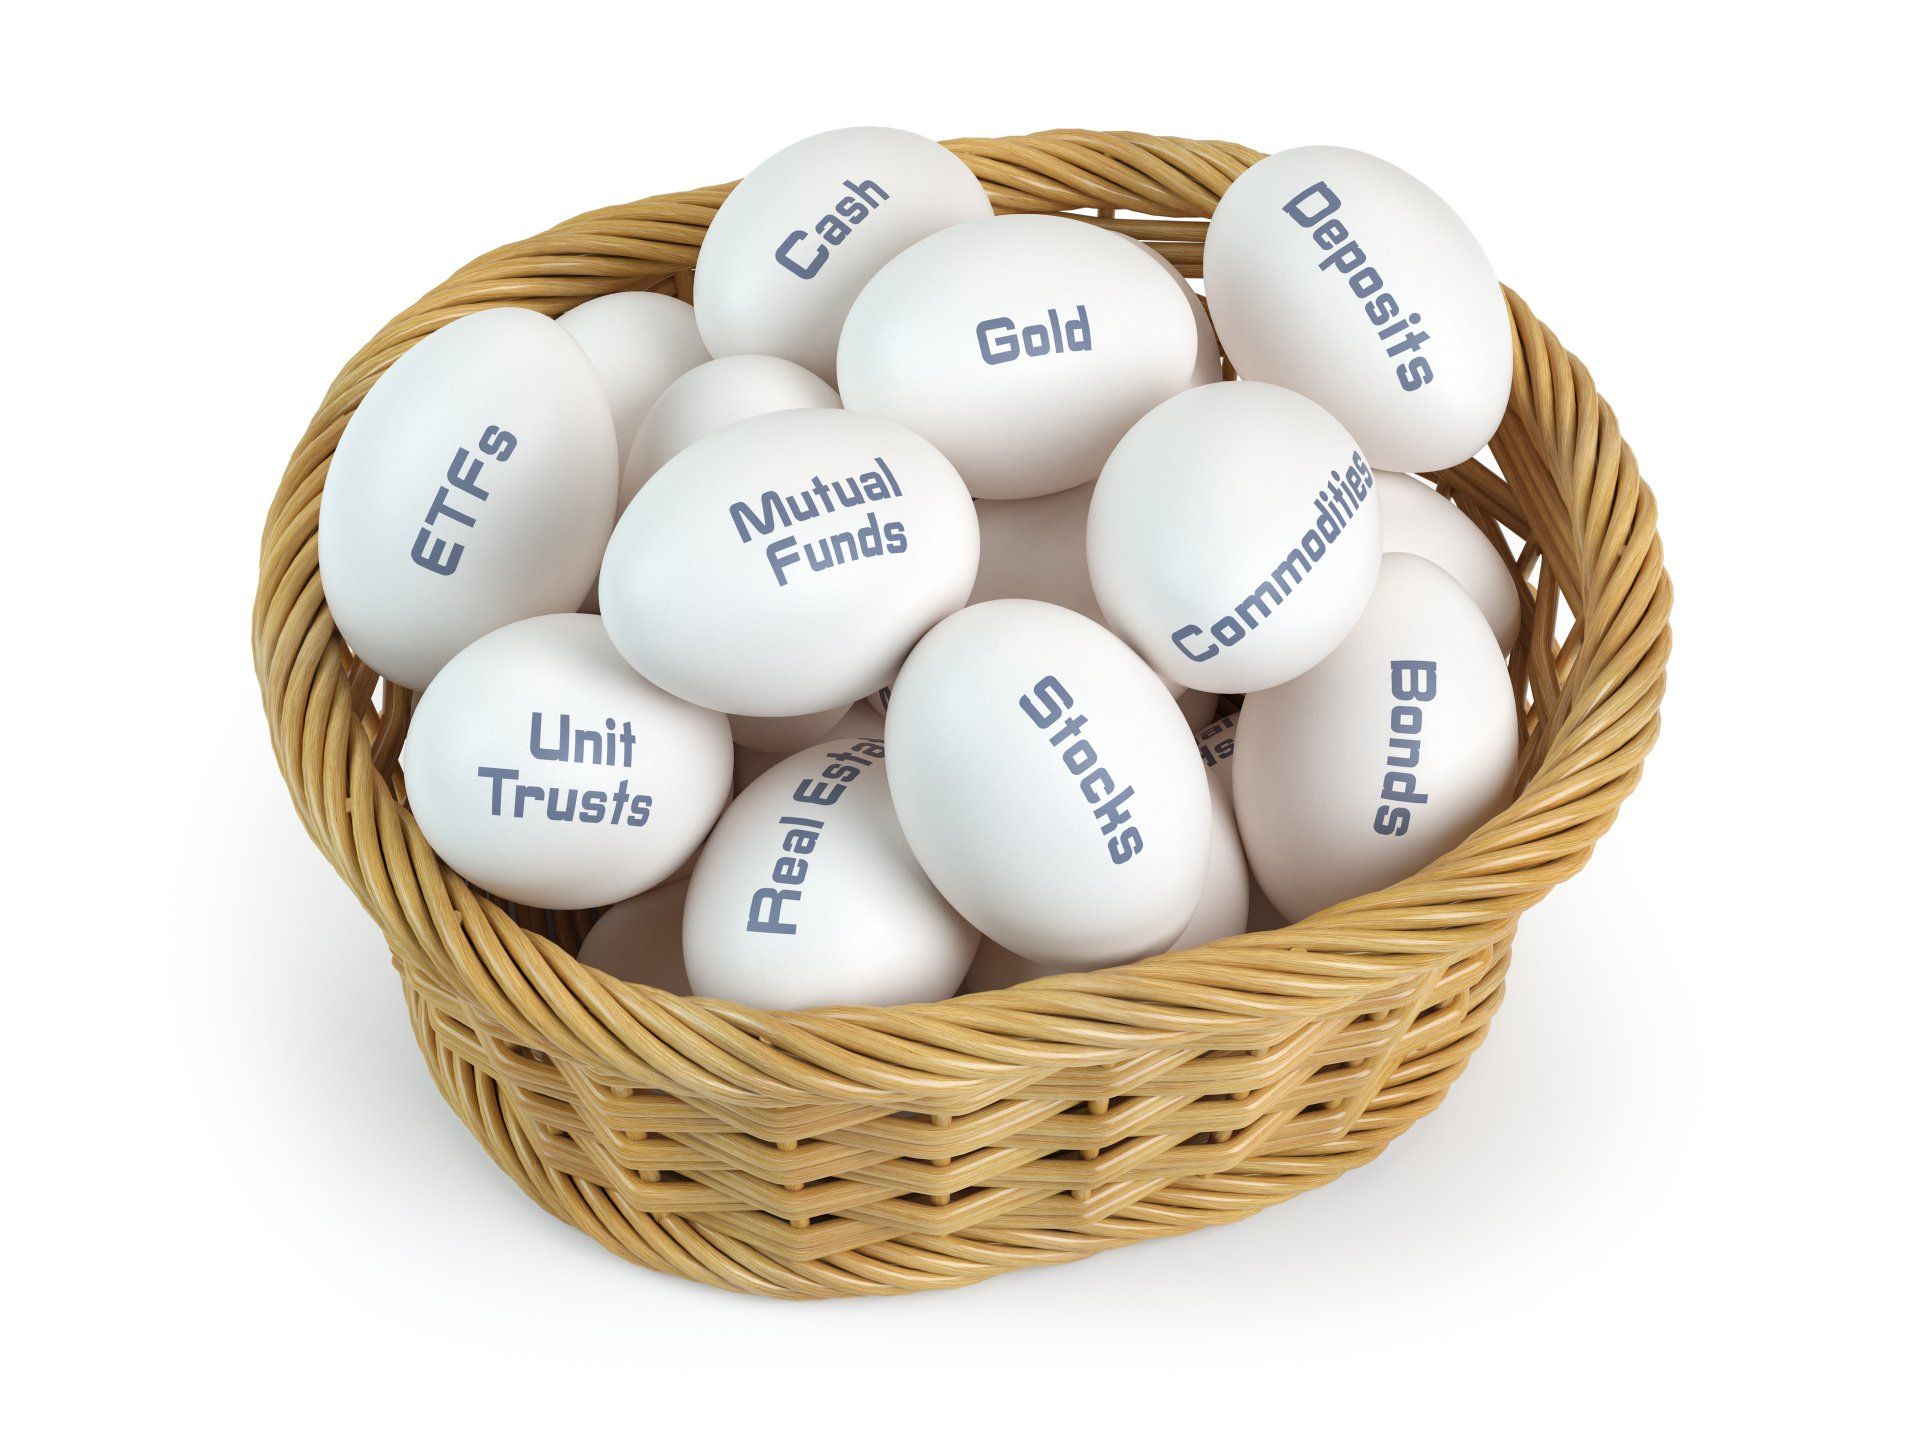 Eggs with different investment strategies in a basket